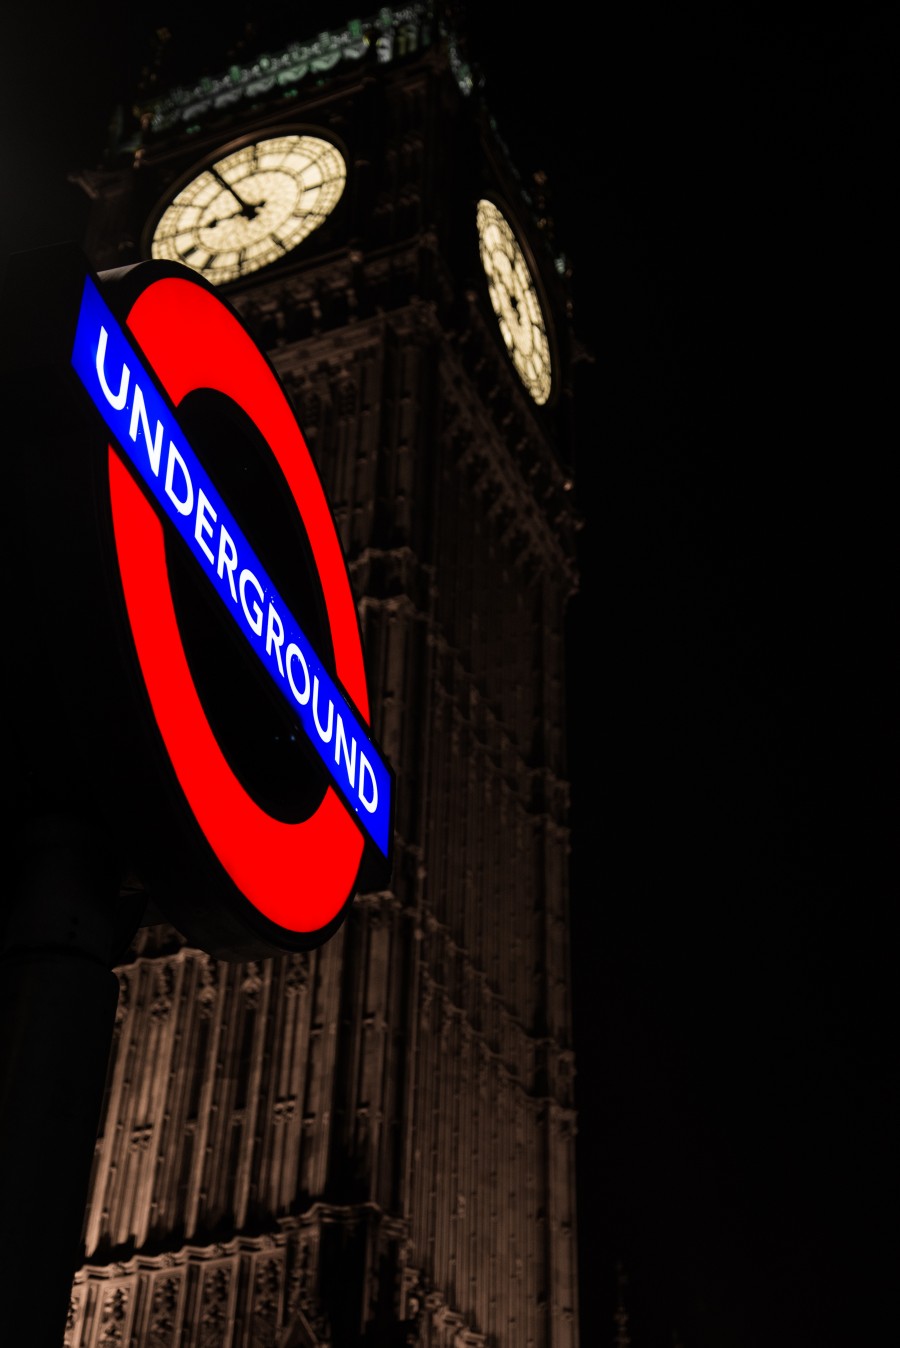 London. The Big Ben and the Underground